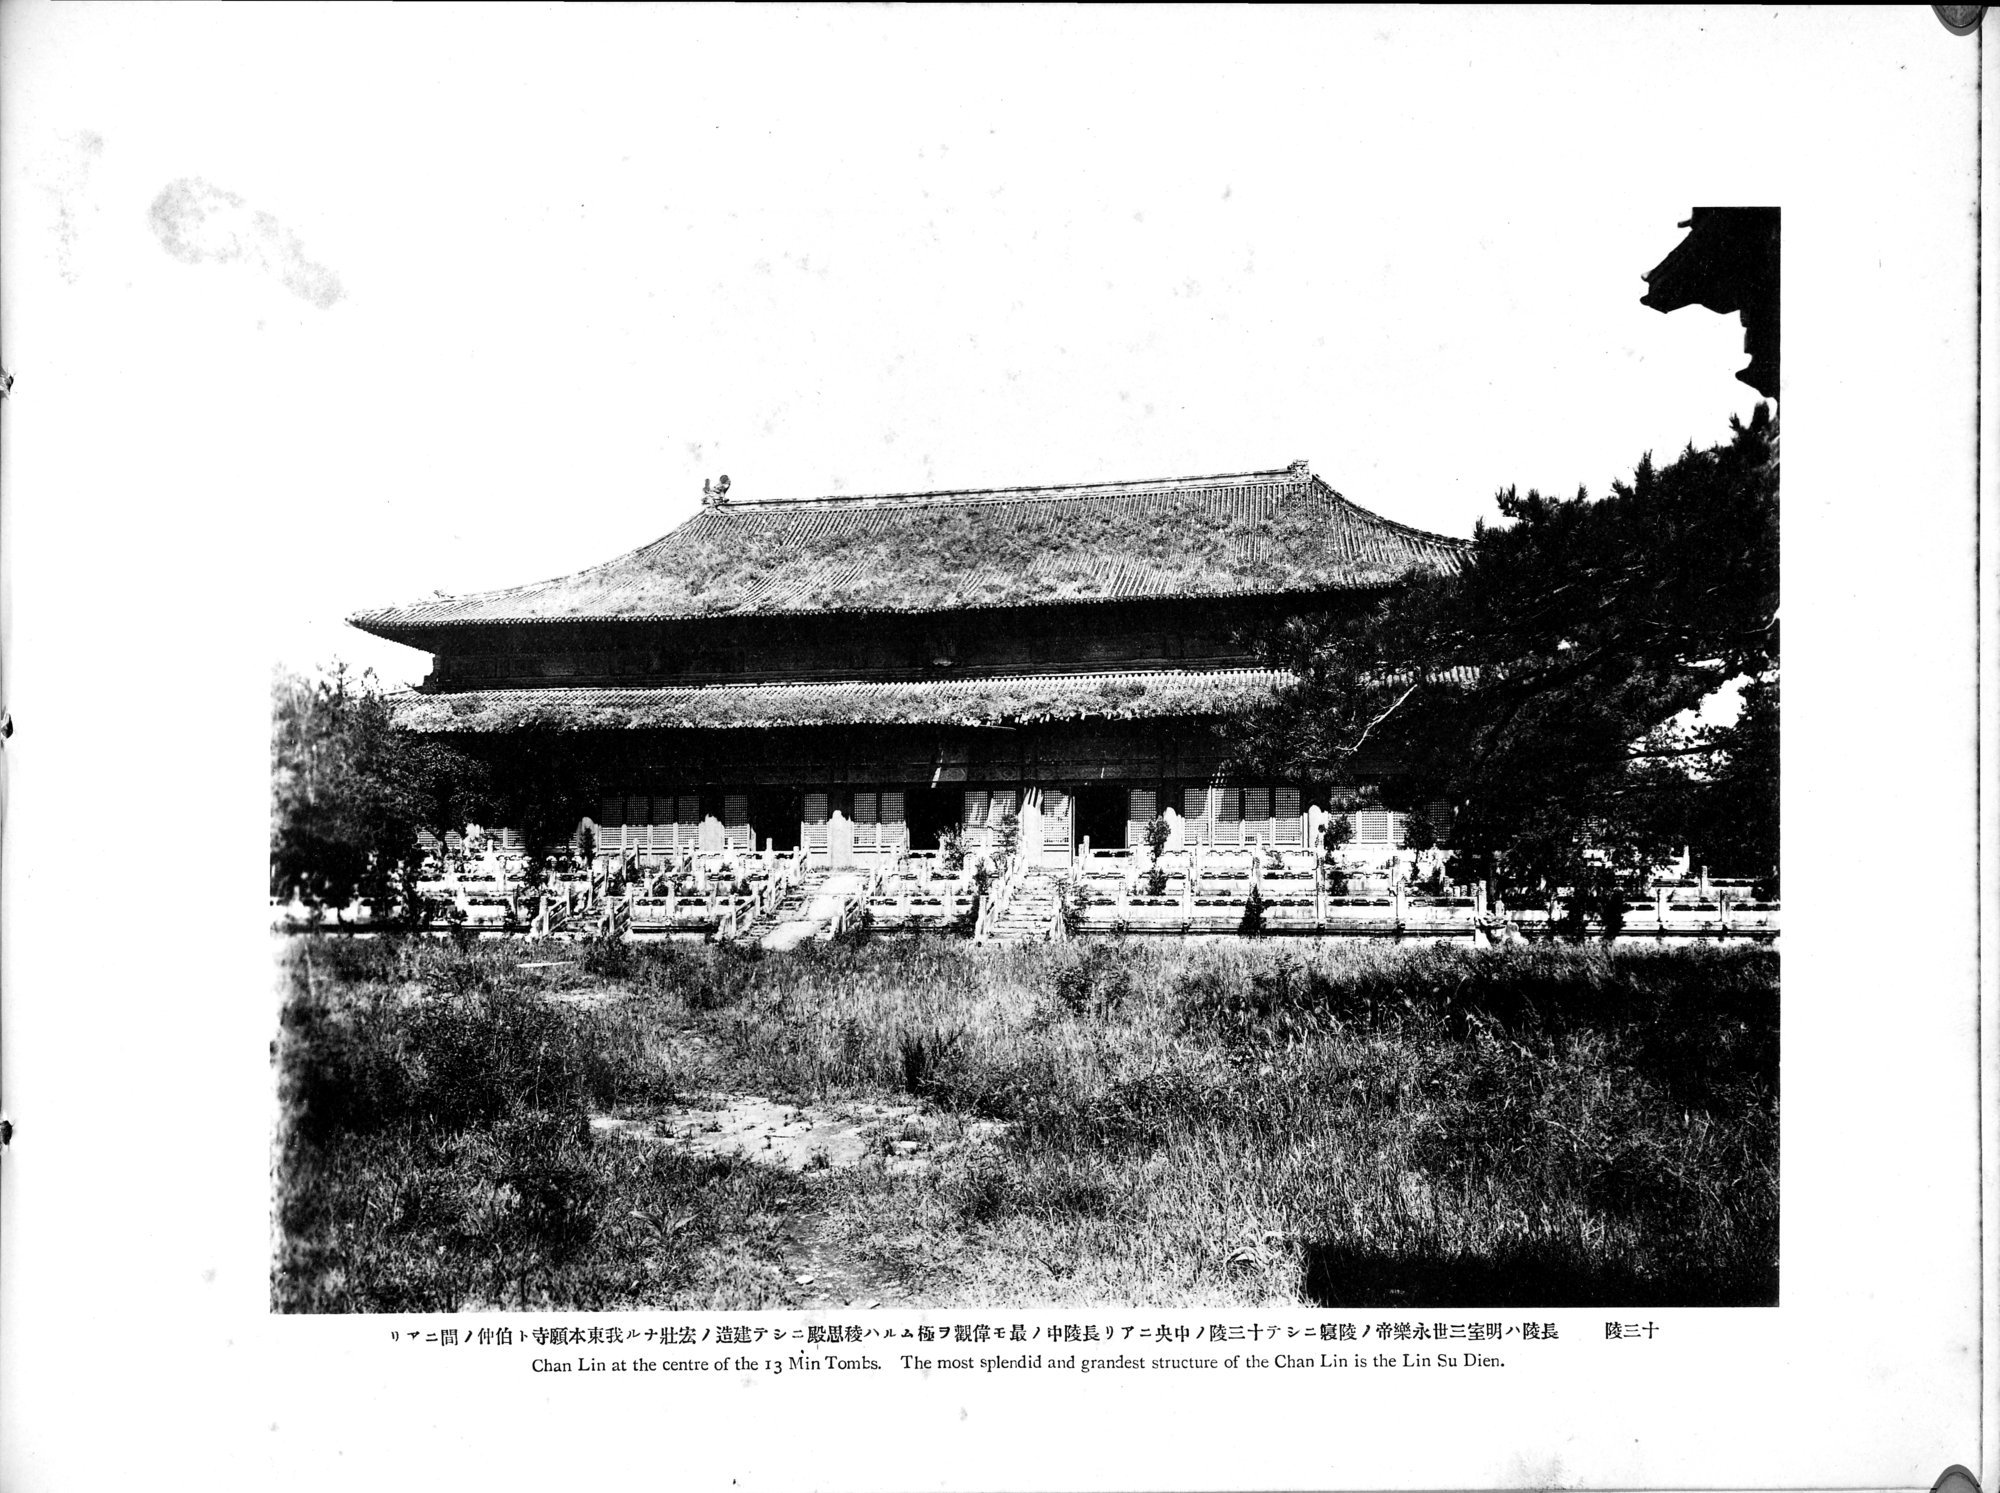 Views and Custom of North China : vol.1 / Page 205 (Grayscale High Resolution Image)